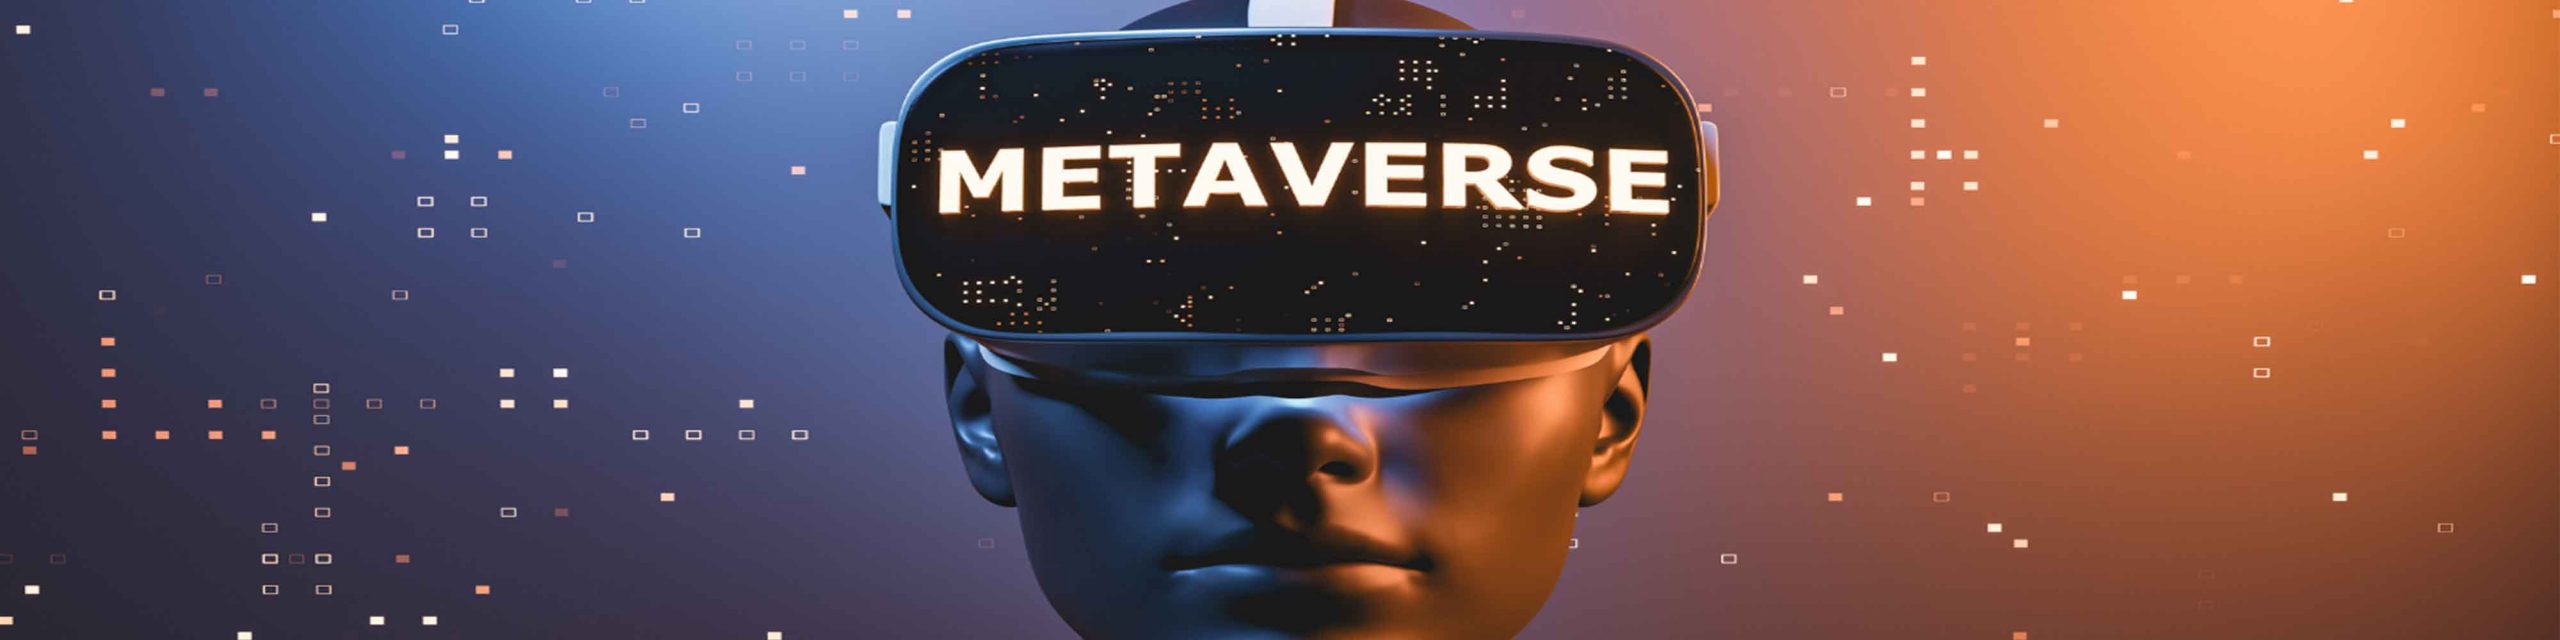 Person wearing an VI visor with Metaverse written on it